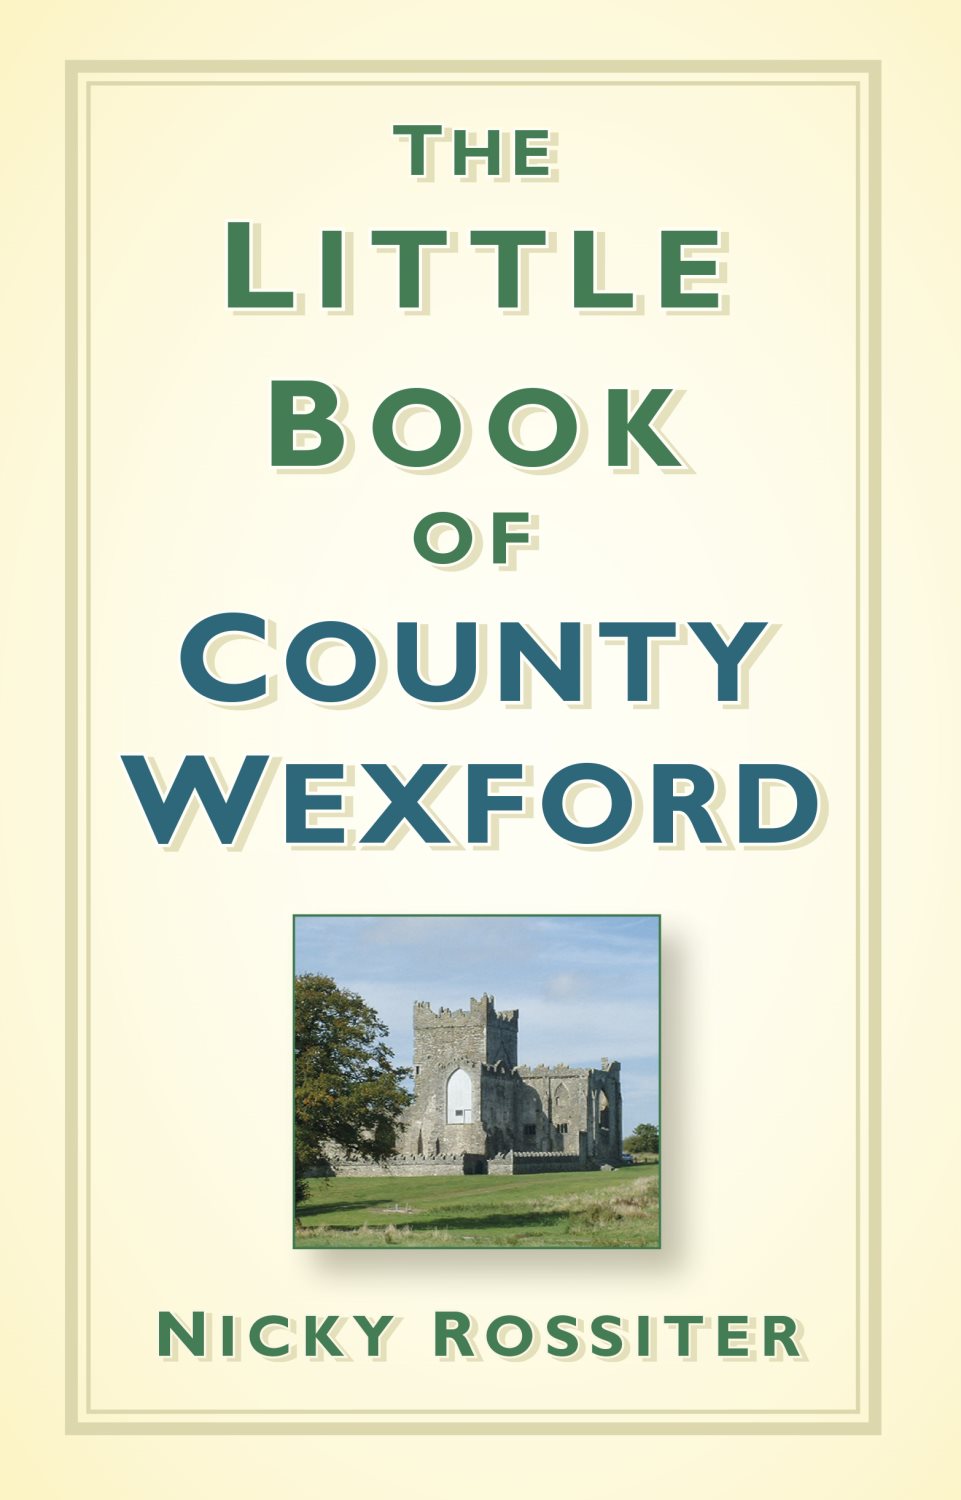 The Little Book of County Wexford